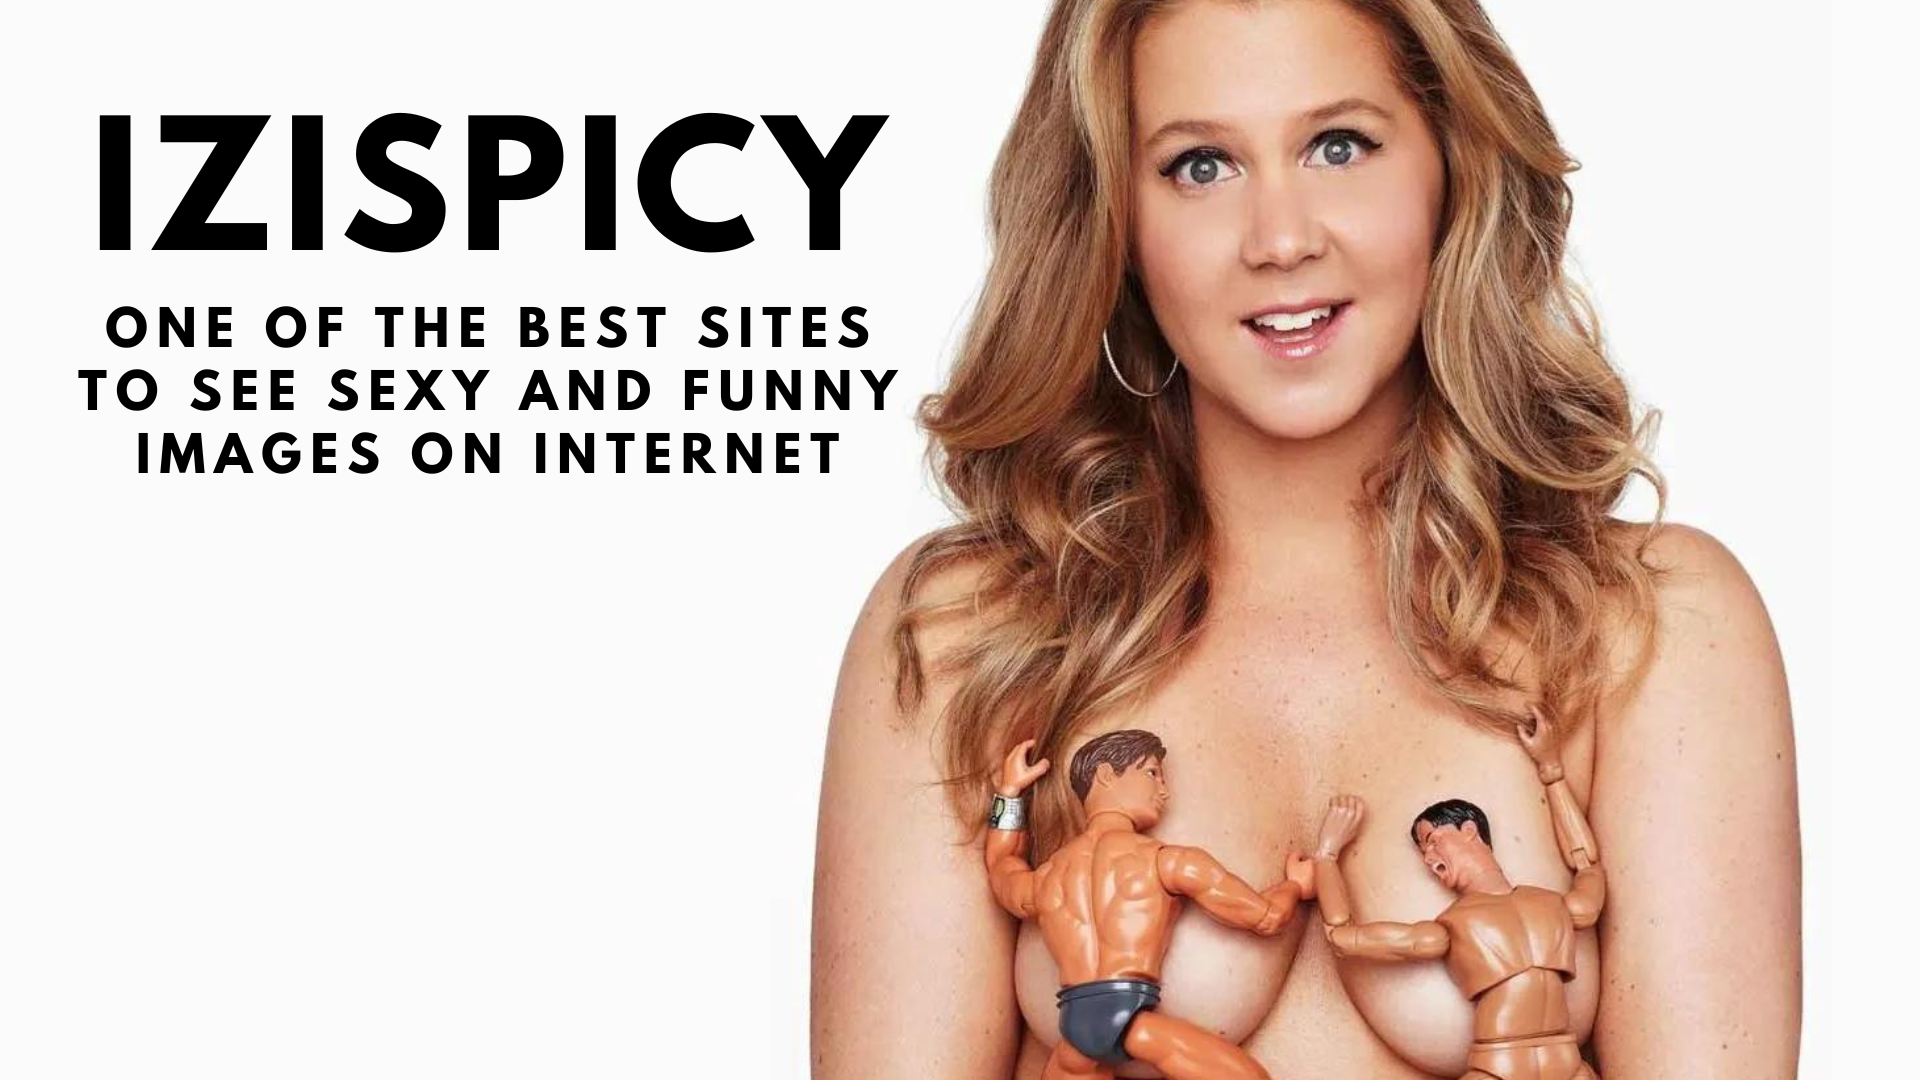 Izispicy - One Of The Best Sites To See Sexy And Funny Images On Internet